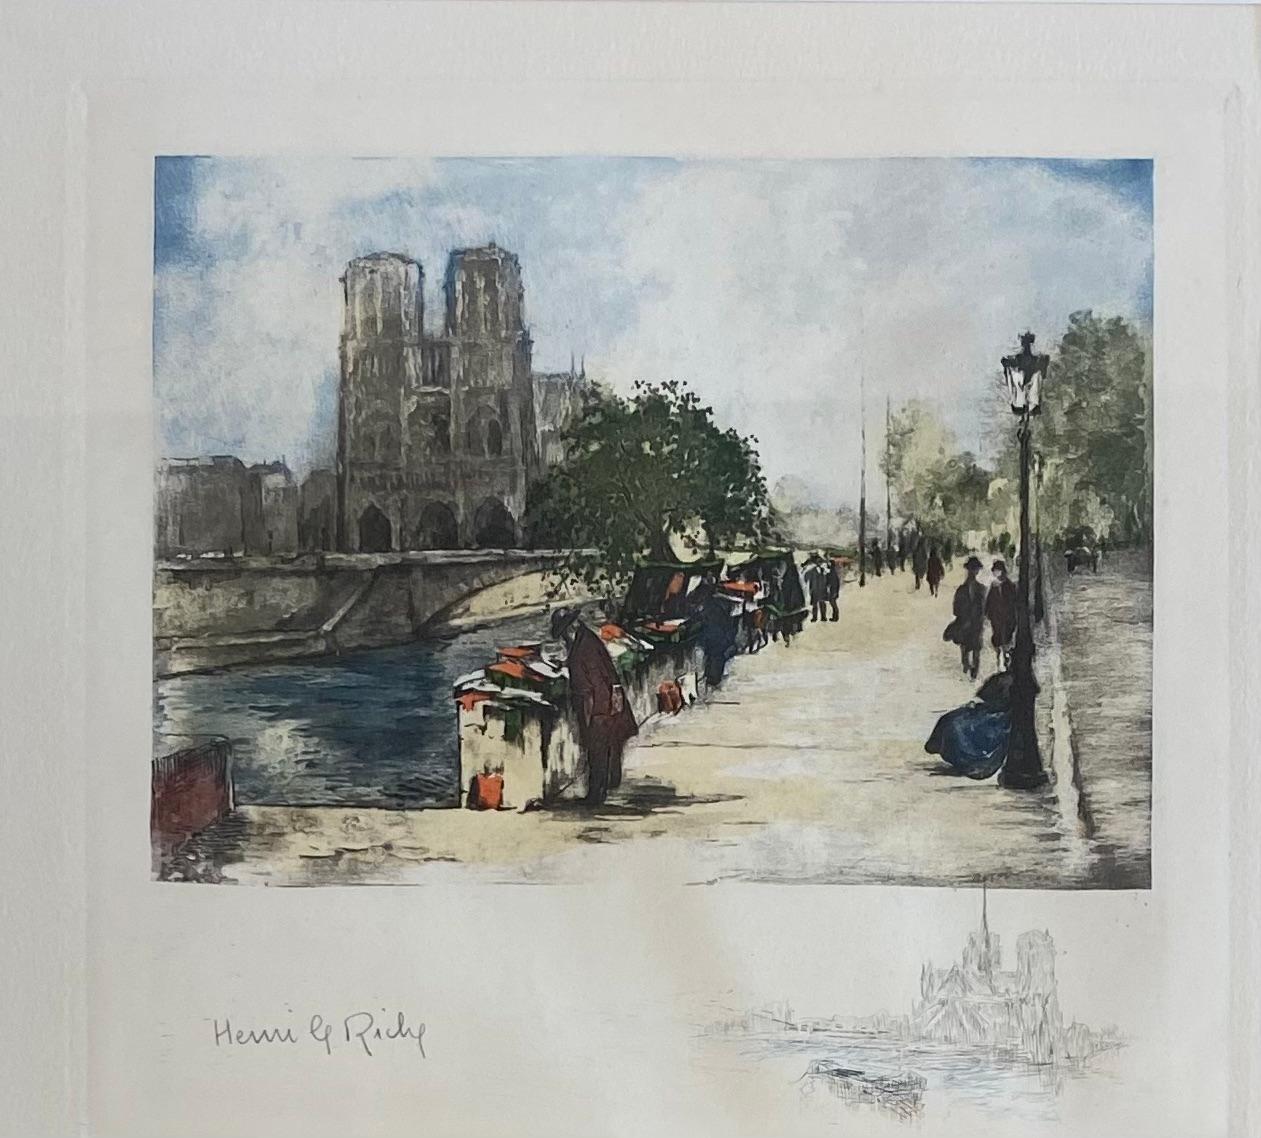 A beautiful original watercolor painting depicting Notre Dame Cathedral and the Seine in Paris, France. Painted by Henri Le Riche. 

Hand signed on the bottom left, pencil drawing of the cathedral and the Seine are also featured on the lower right.